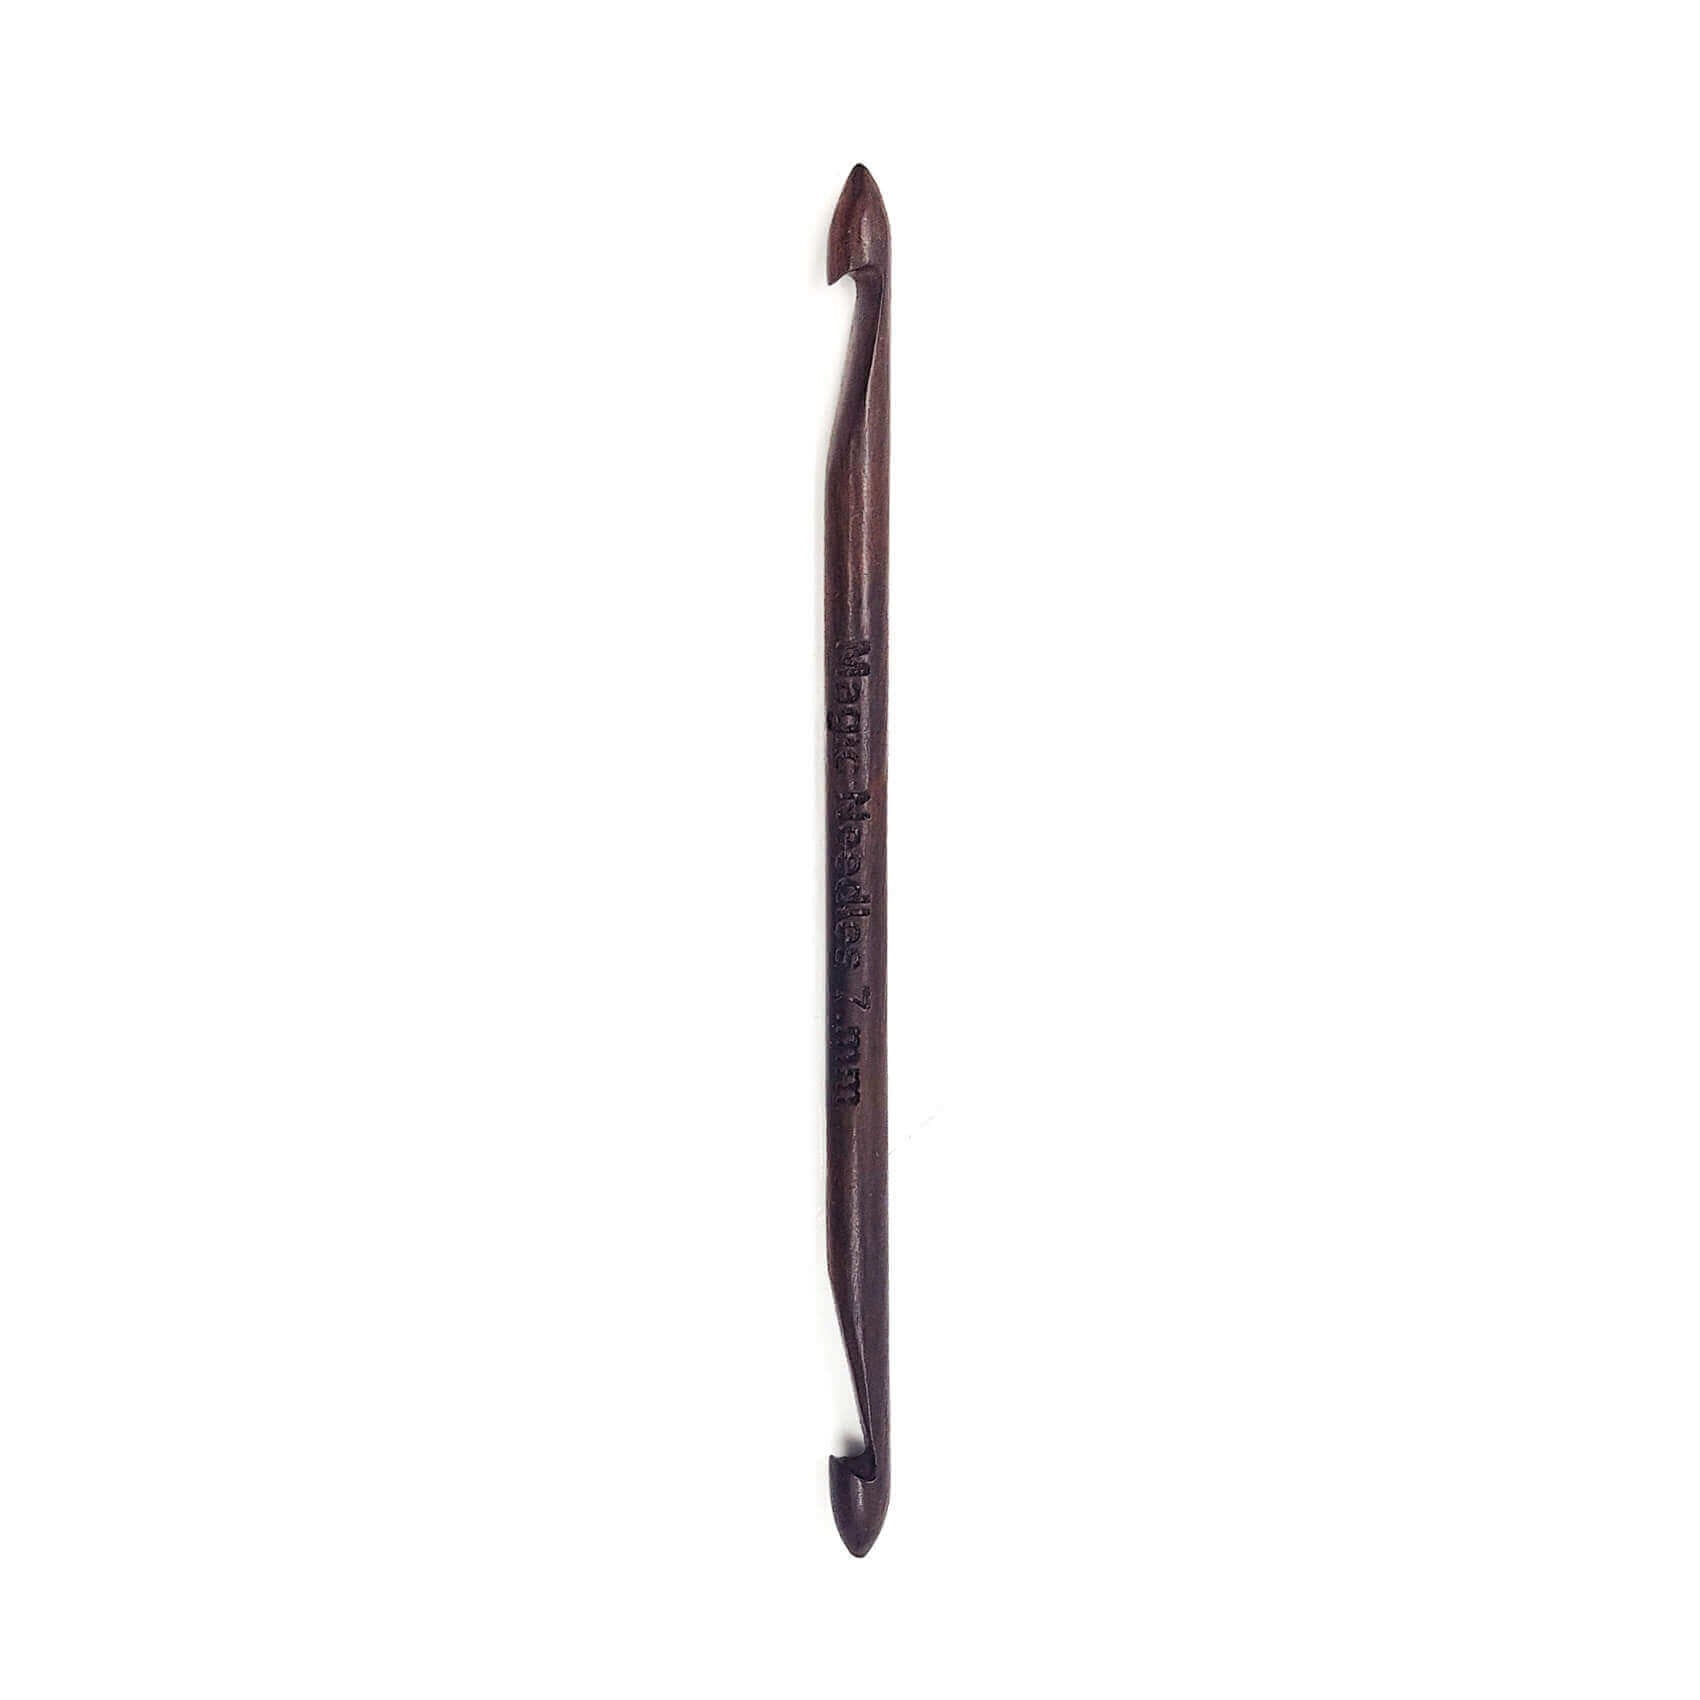 Rosewood Double Ended Crochet Hook - 7 mm